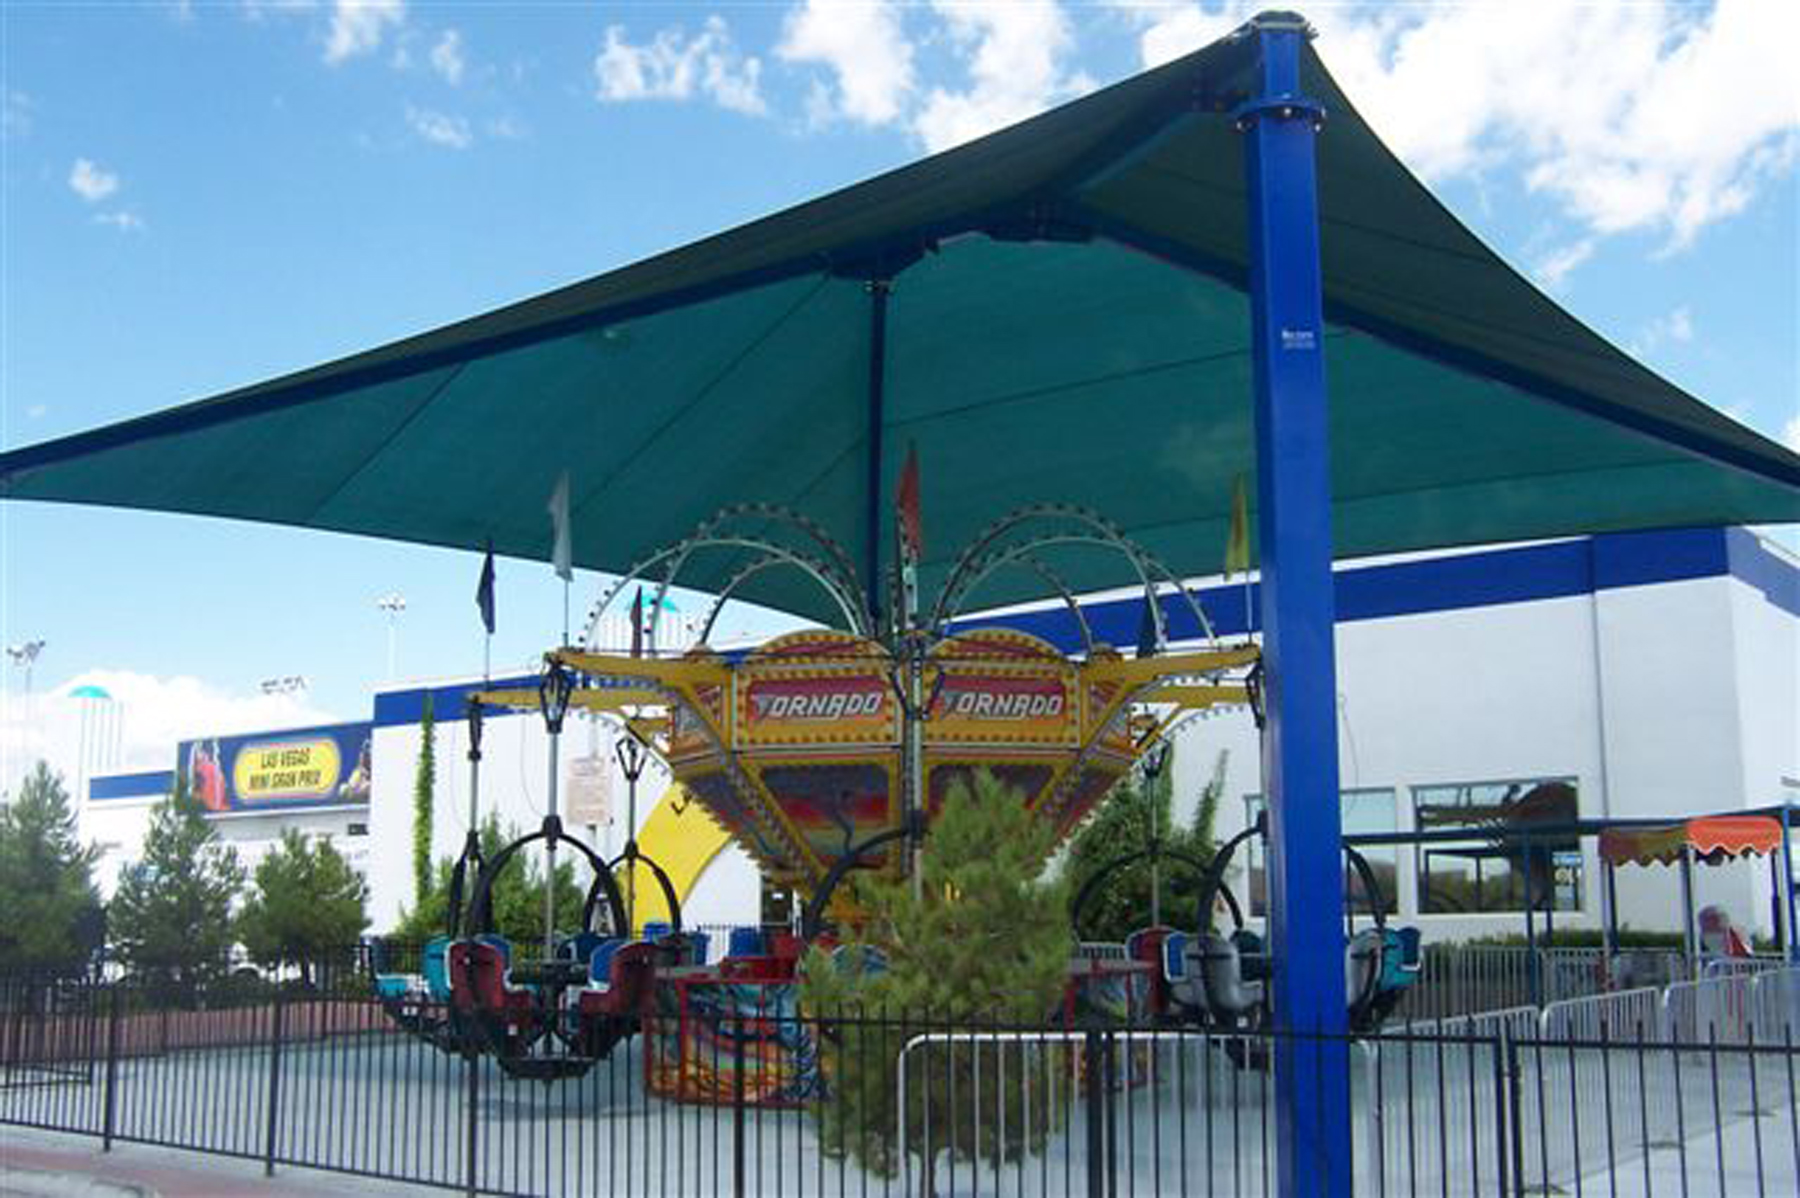 large shade covering carnival ride